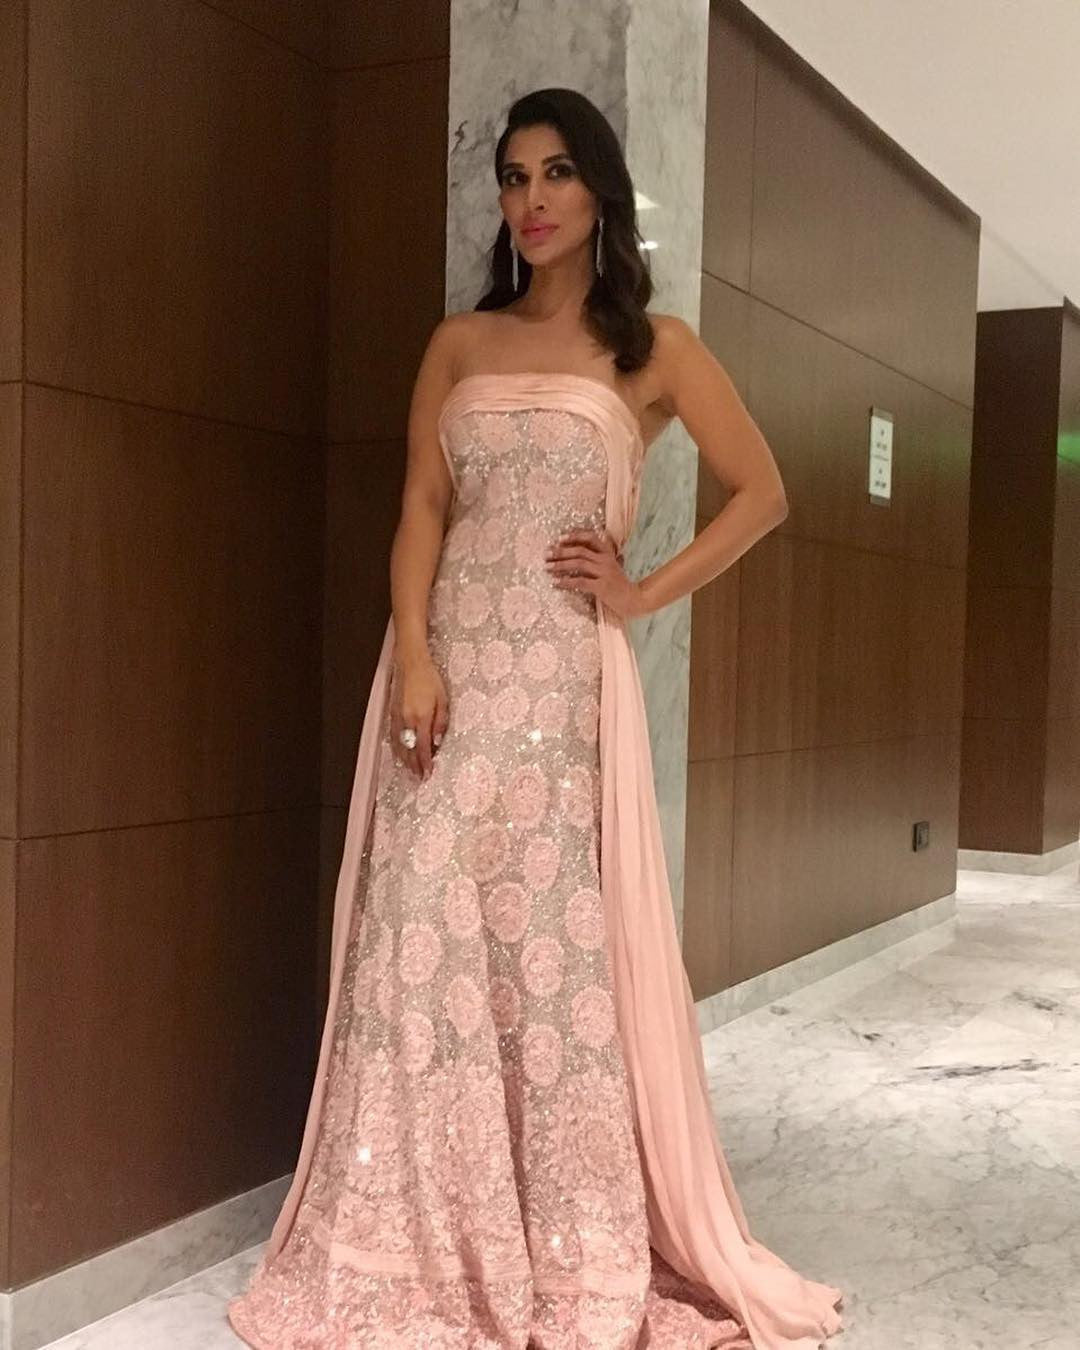 Sophie Choudry Looked Attractive In Manish Malhotra’s Designer Gown